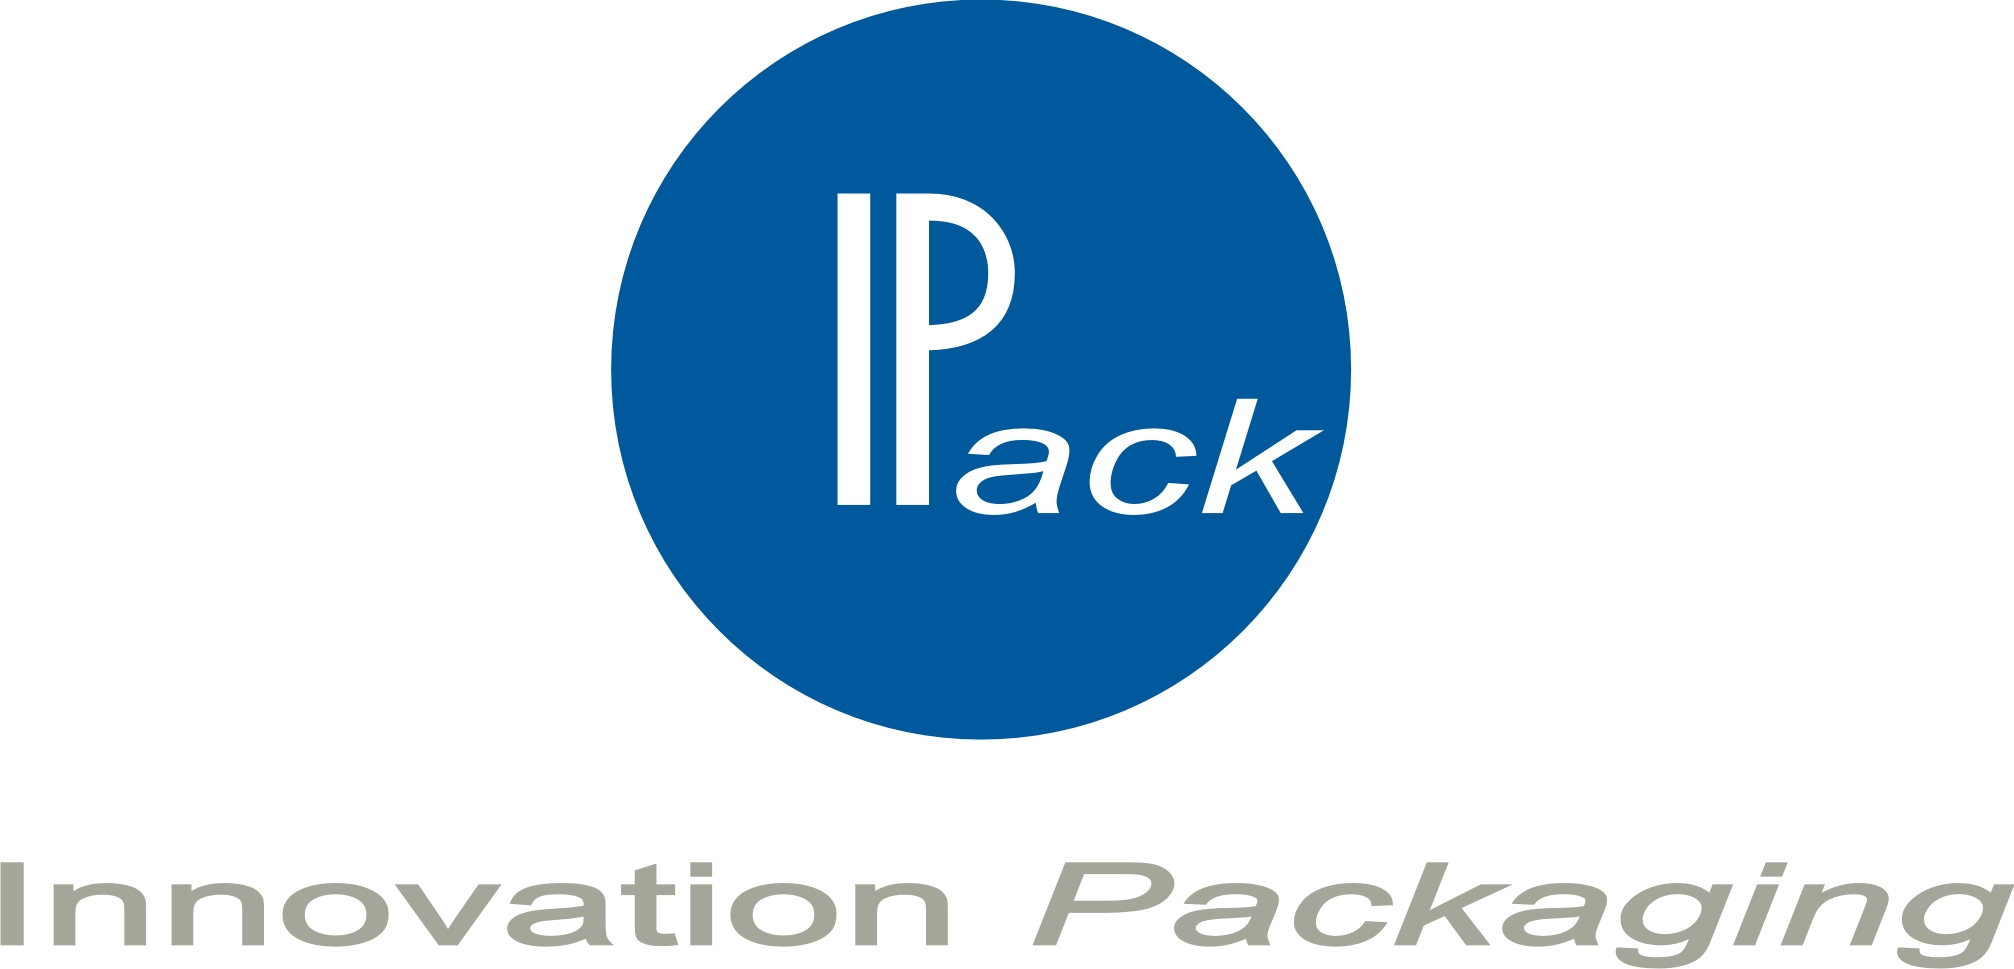 IPack